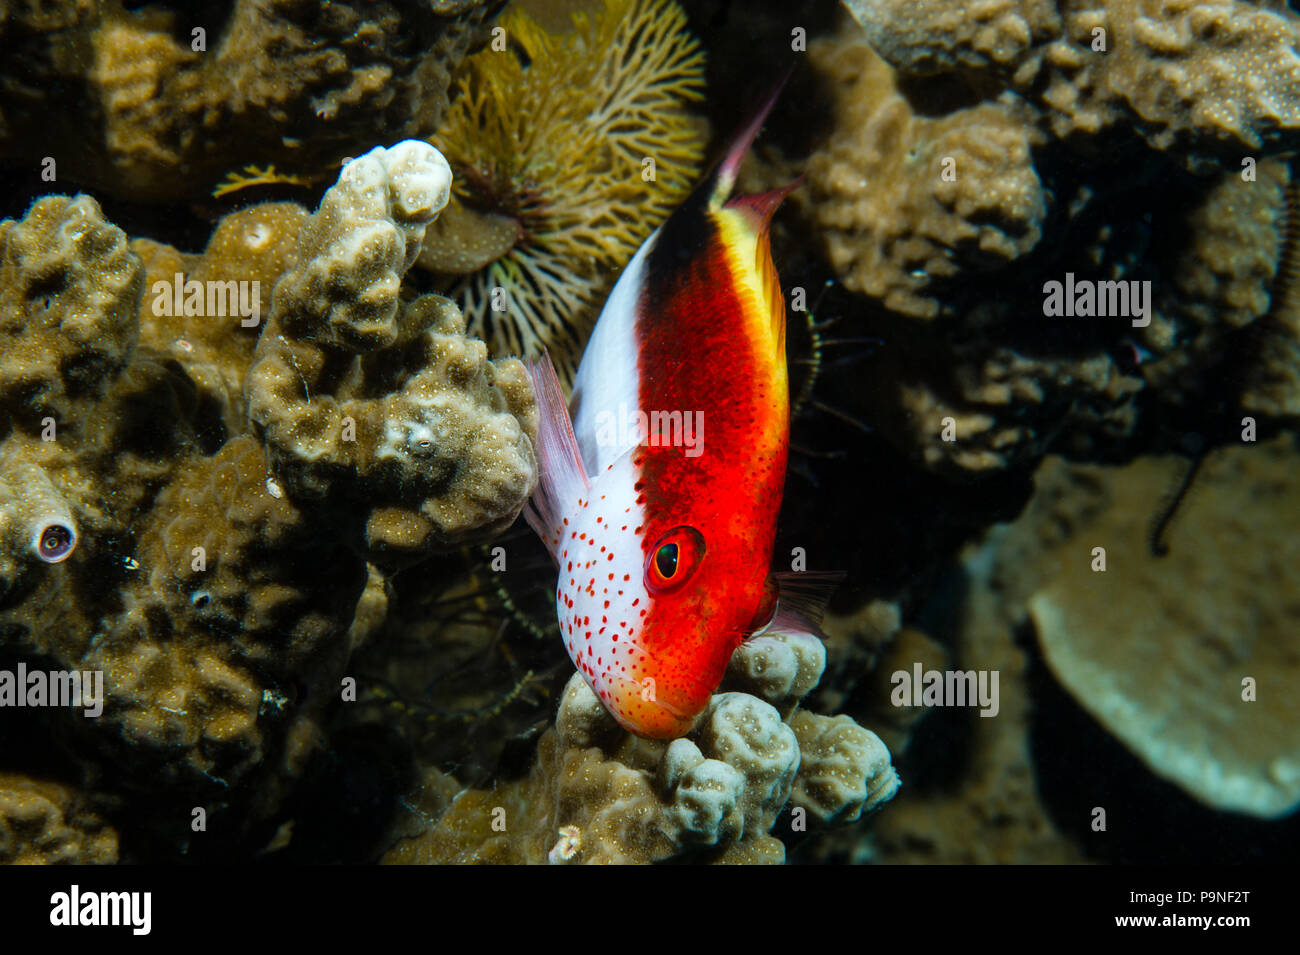 A Freckled Hawkfish taking shelter in a coral reef. Stock Photo